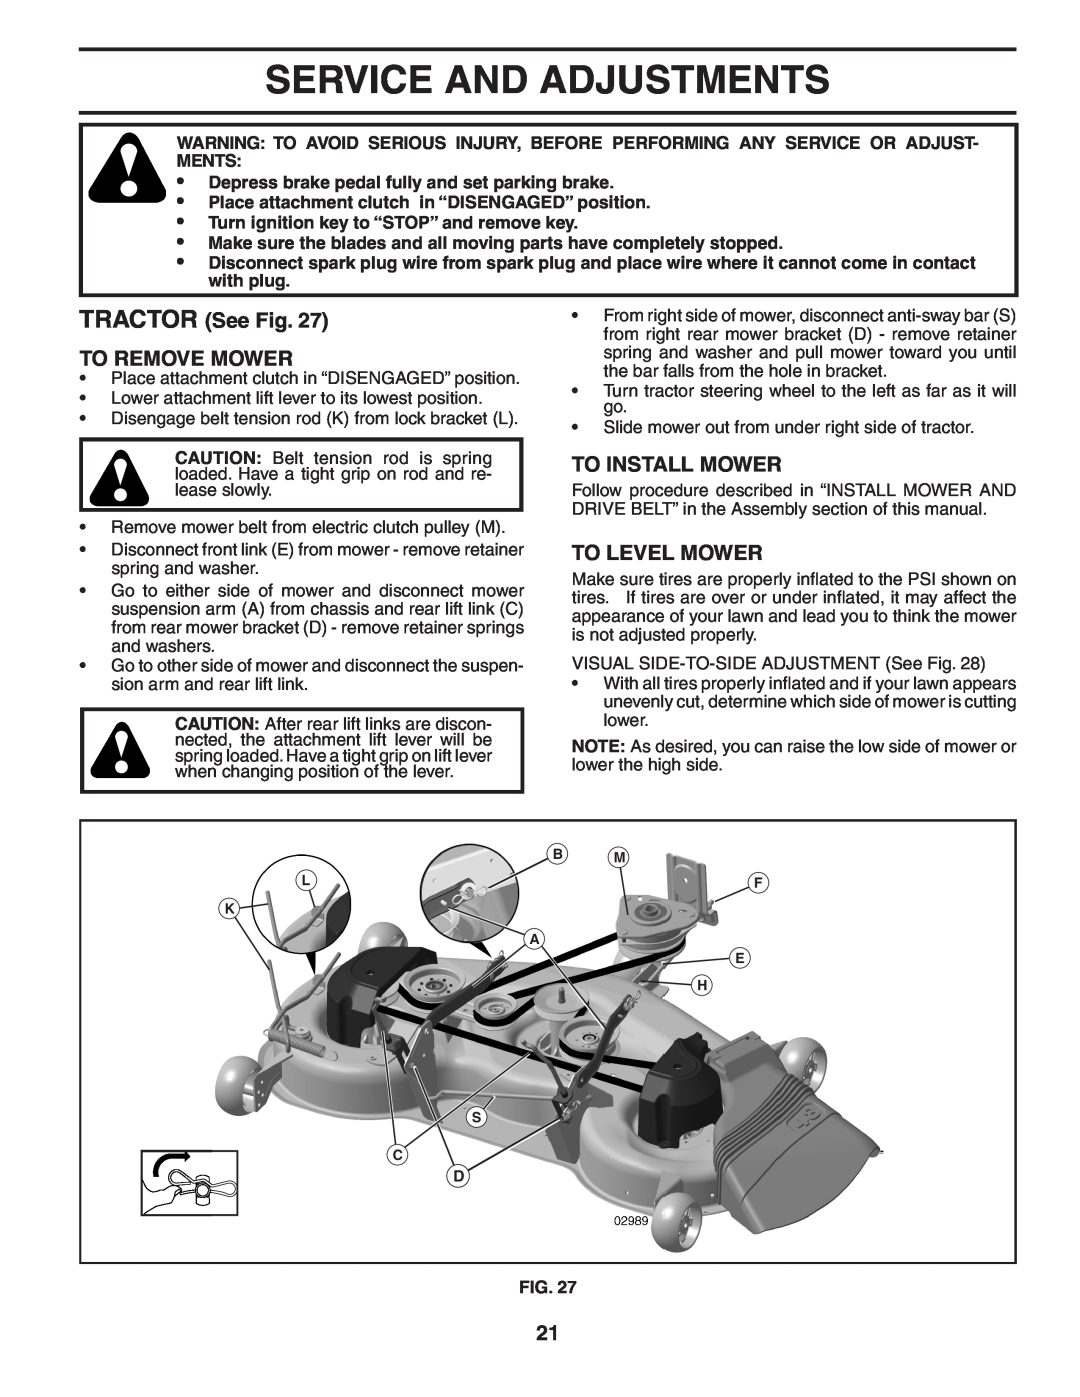 Poulan PBGT22H48 manual Service And Adjustments, TRACTOR See Fig TO REMOVE MOWER, To Install Mower, To Level Mower 